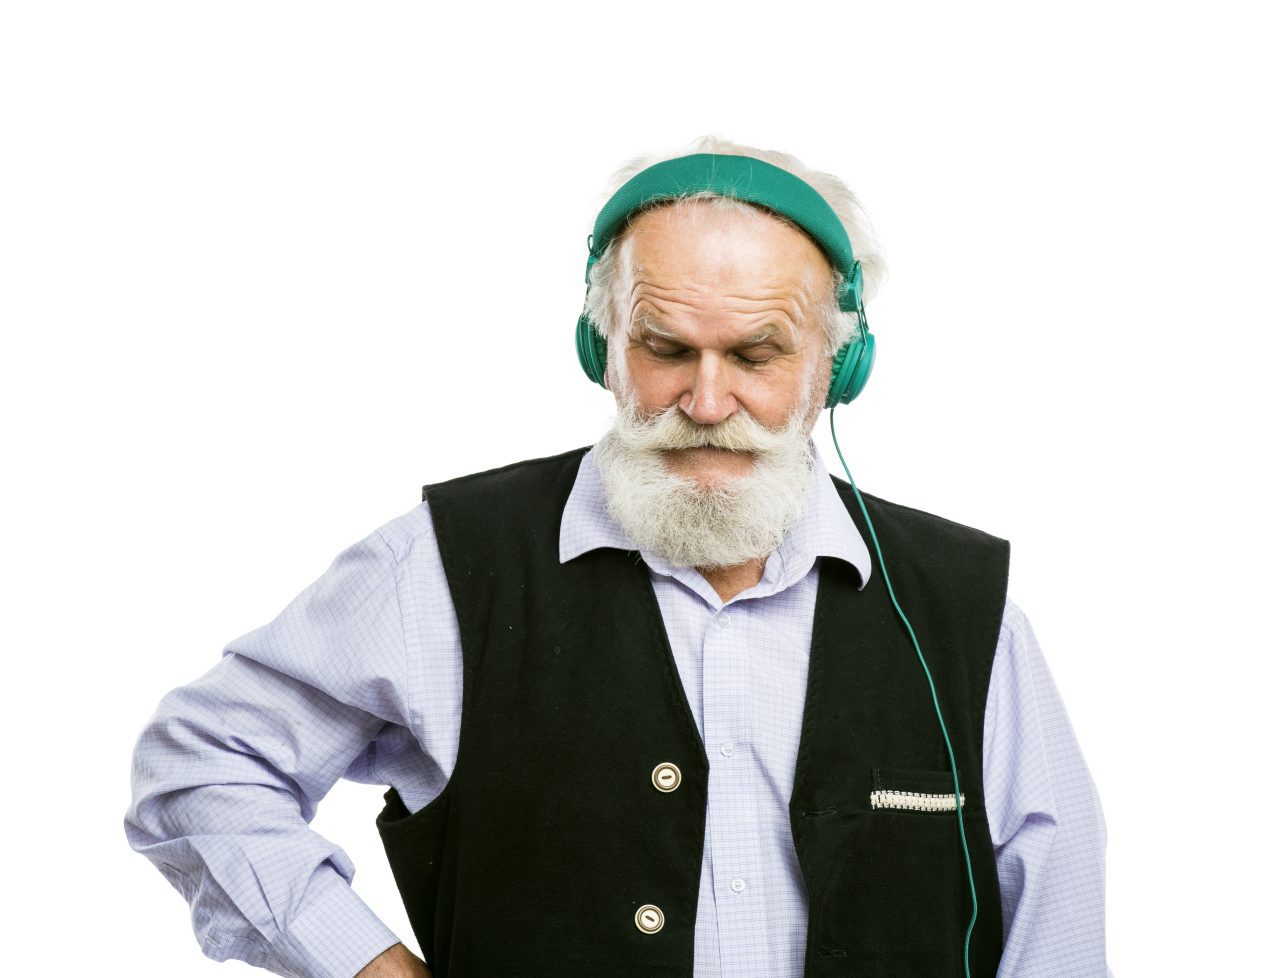 Old active bearded man with headphones listening to music isolated on white background